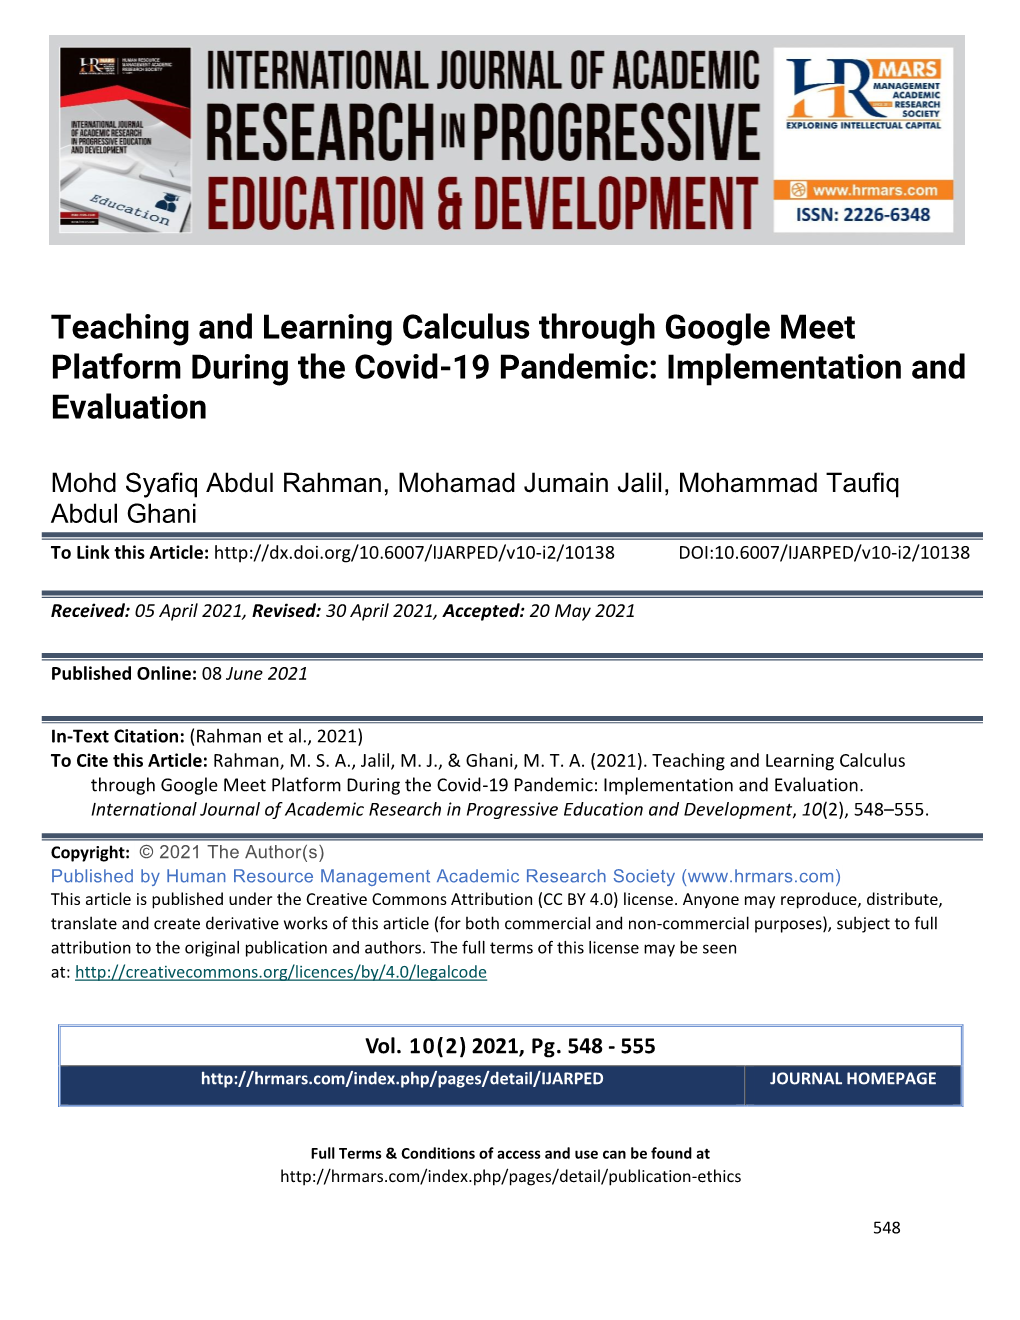 Teaching and Learning Calculus Through Google Meet Platform During the Covid-19 Pandemic: Implementation and Evaluation